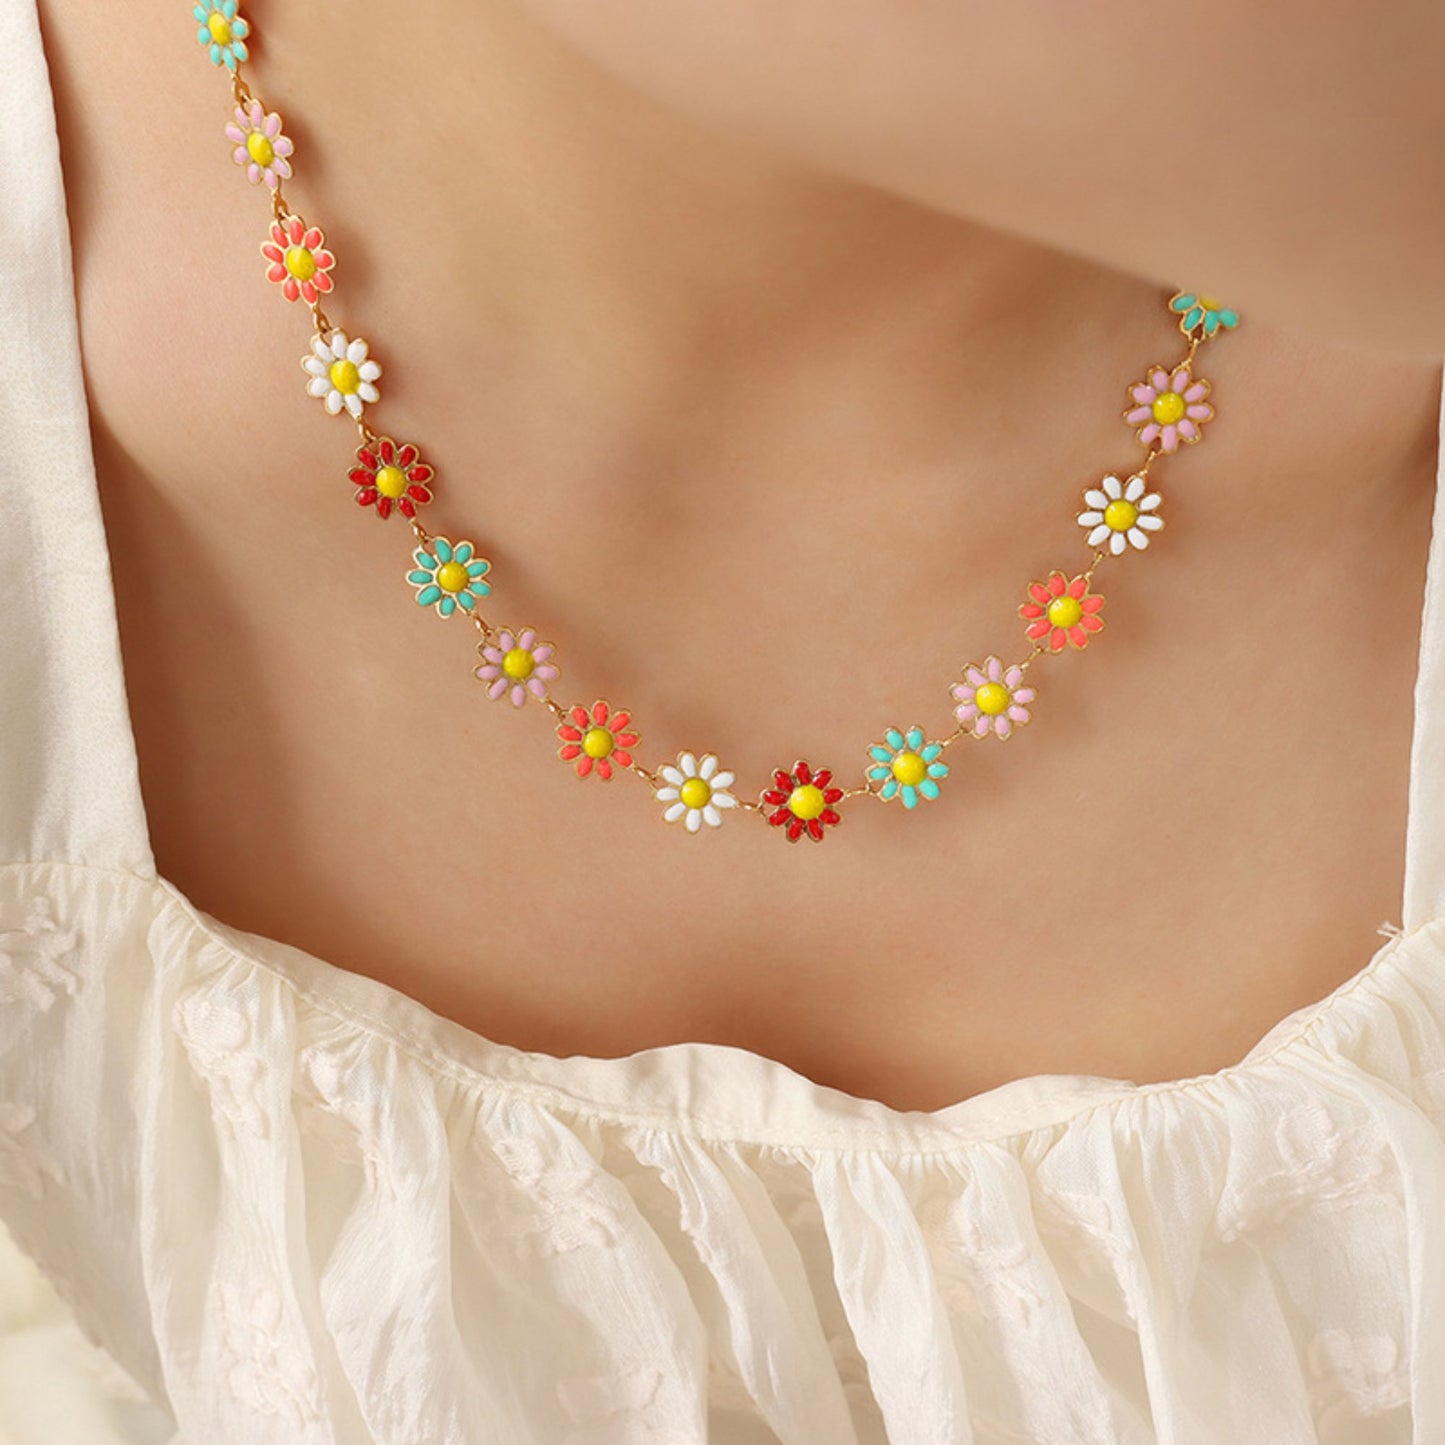 Colorful Sunflower Necklace and Bracelet/Waterproof